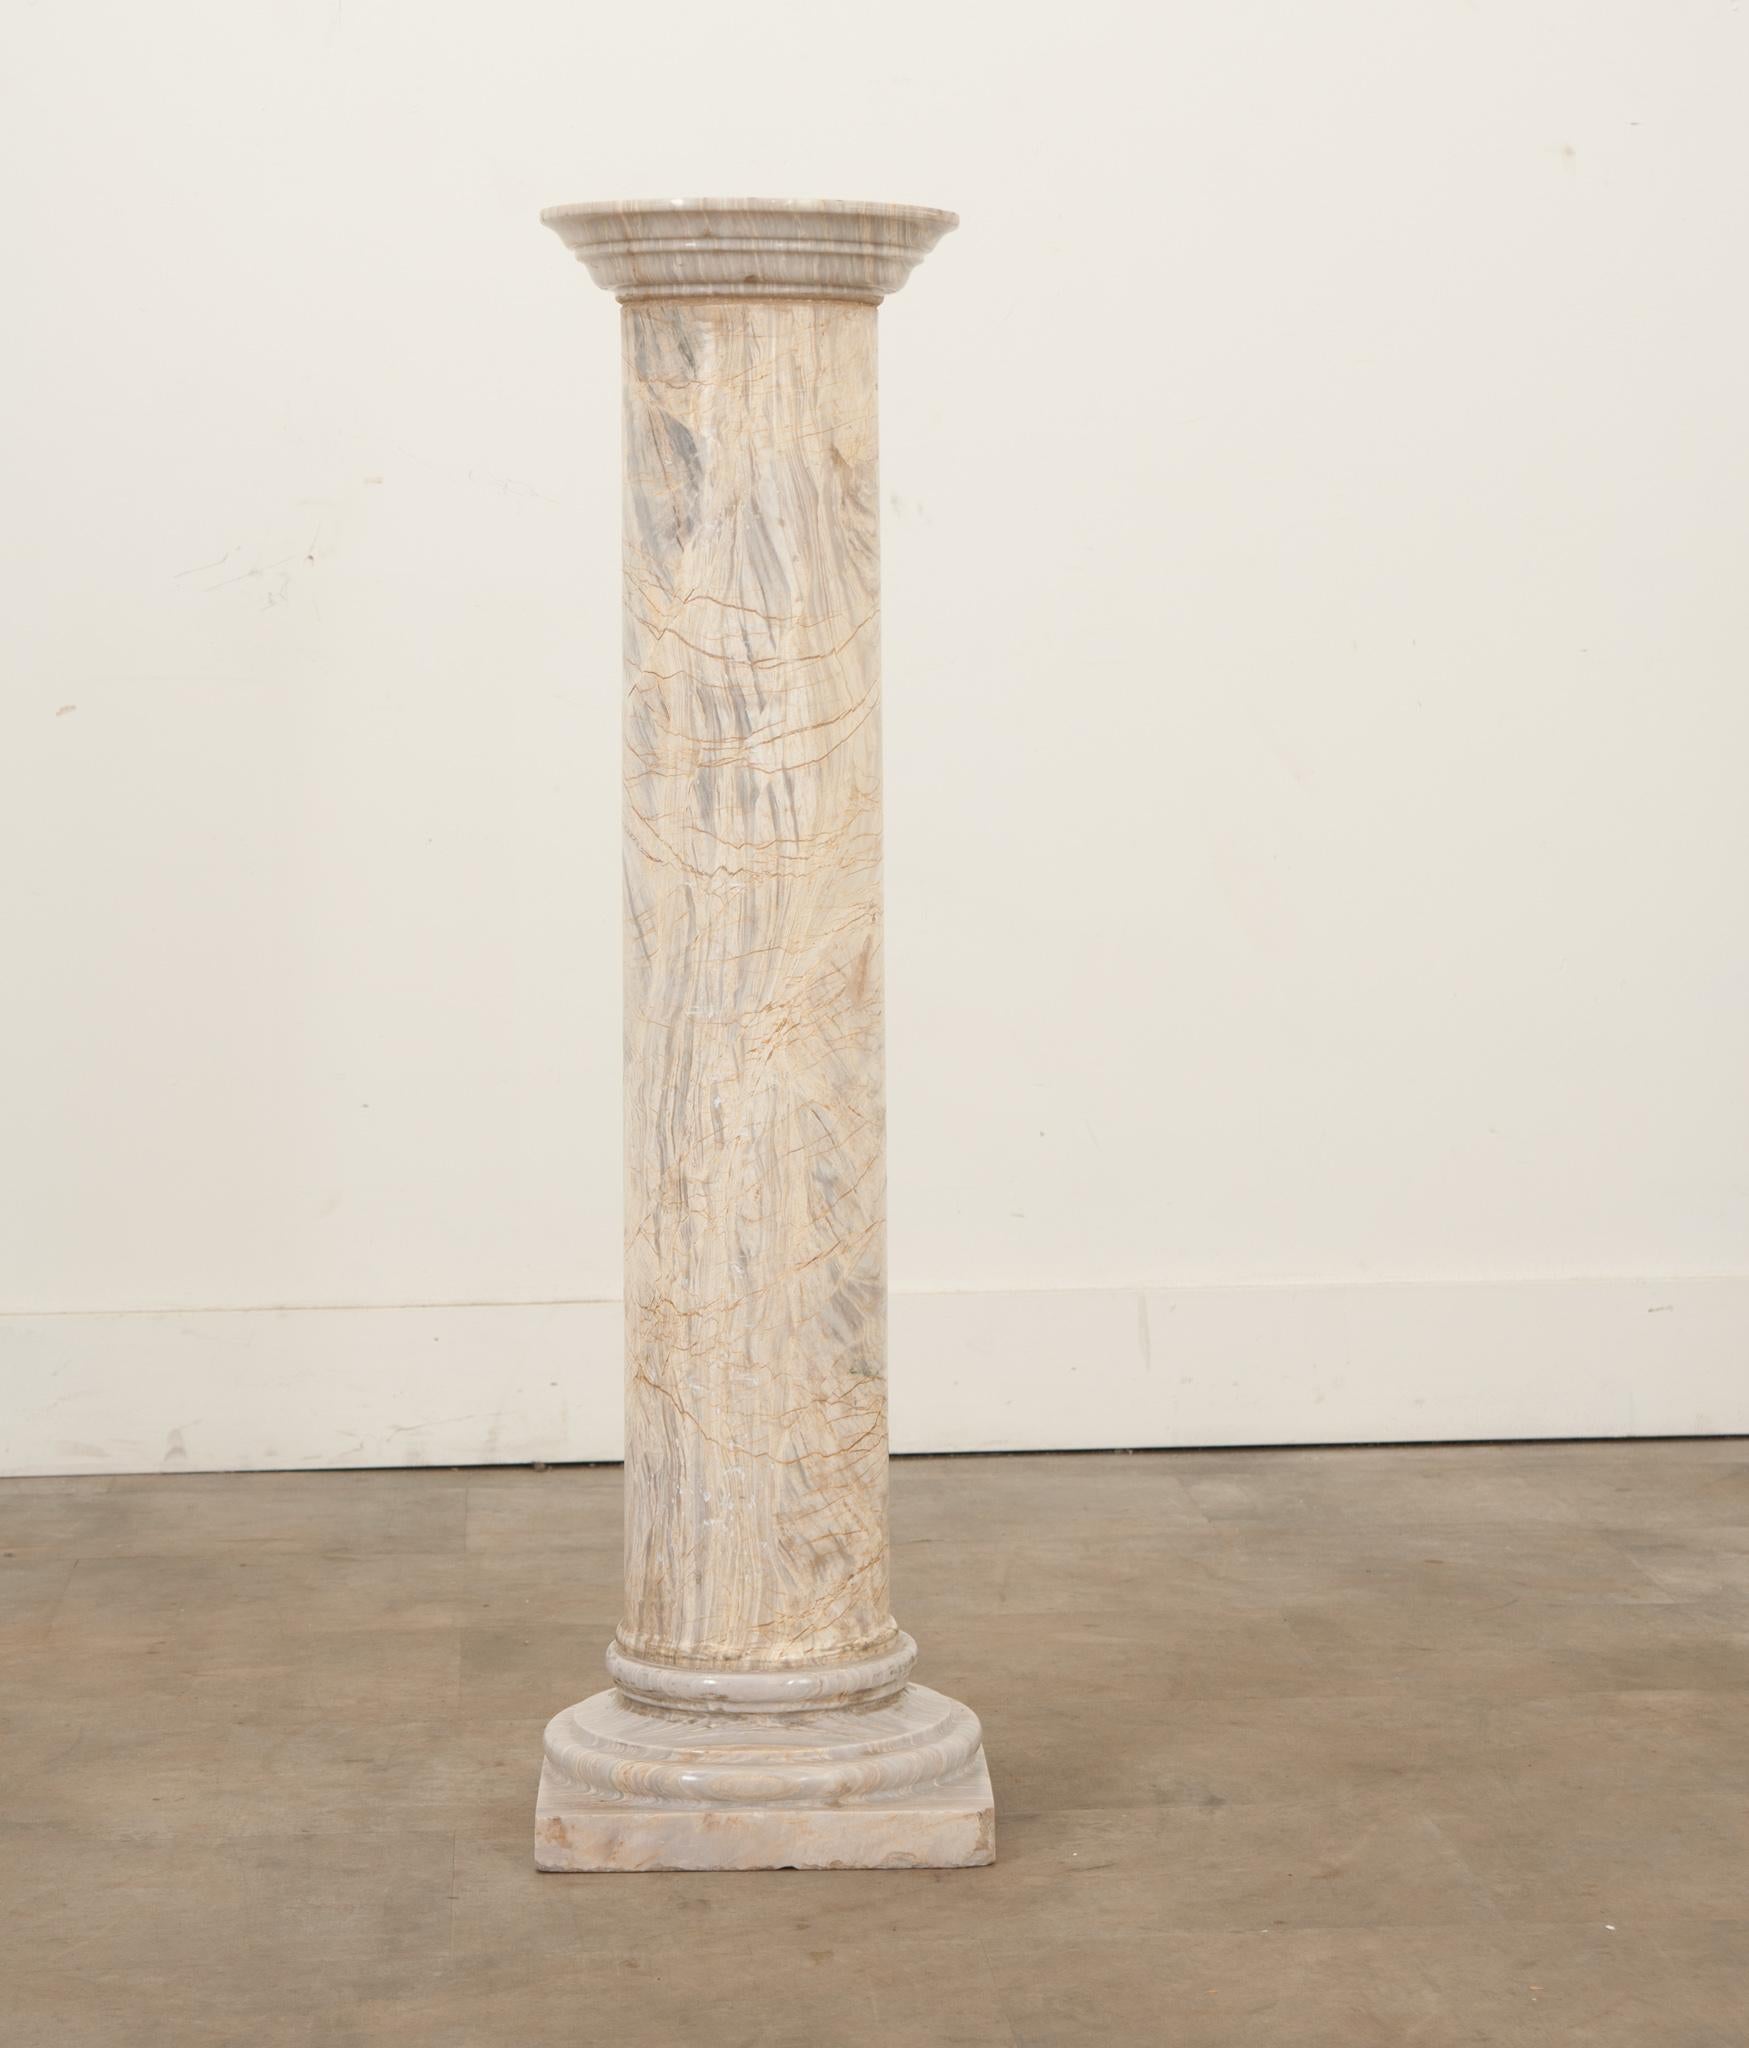 A solid marble column made in the early 1900’s France, with a beautiful naturally aged patina. This carved column would be perfectly topped with an urn, vase, or sculpture in any covered outdoor setting or inside your home.  Be sure to view the